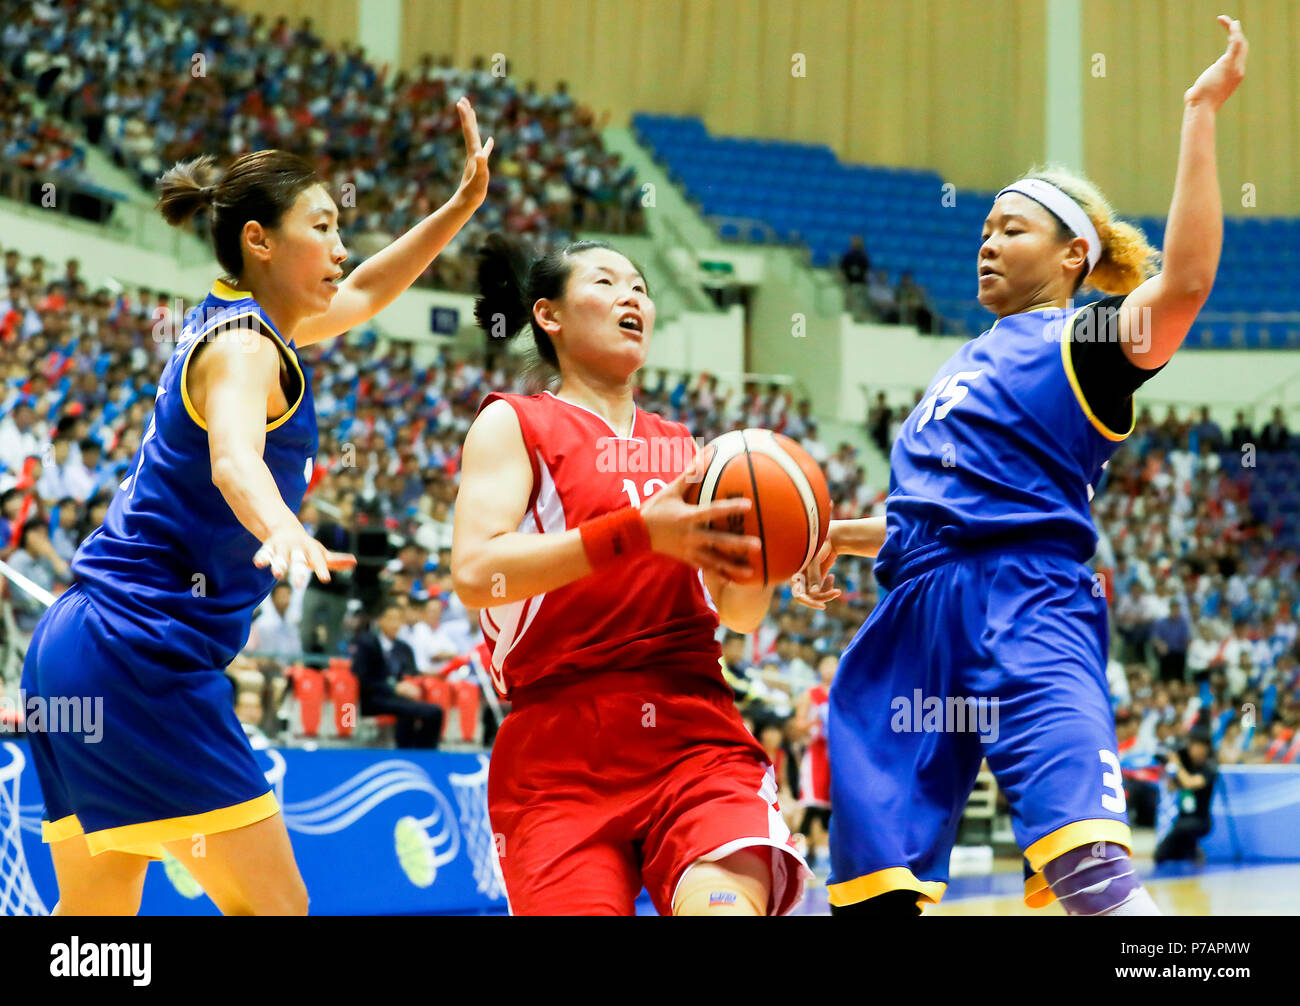 Inter-Korean friendly basketball match, July 5, 2018 : North Korea's Ro Suk-Yong (C) in action during inter-Korean women's friendly basketball match at Ryugyong Chung Ju-yung Gymnasium in Pyongyang, North Korea. The 100-strong South Korean delegation of athletes, coaches, government officials and journalists arrived in Pyongyang on July 3 for the matches which have not been held in 15 years. Credit: Press Pool in Pyeongyang/AFLO/Alamy Live News Stock Photo